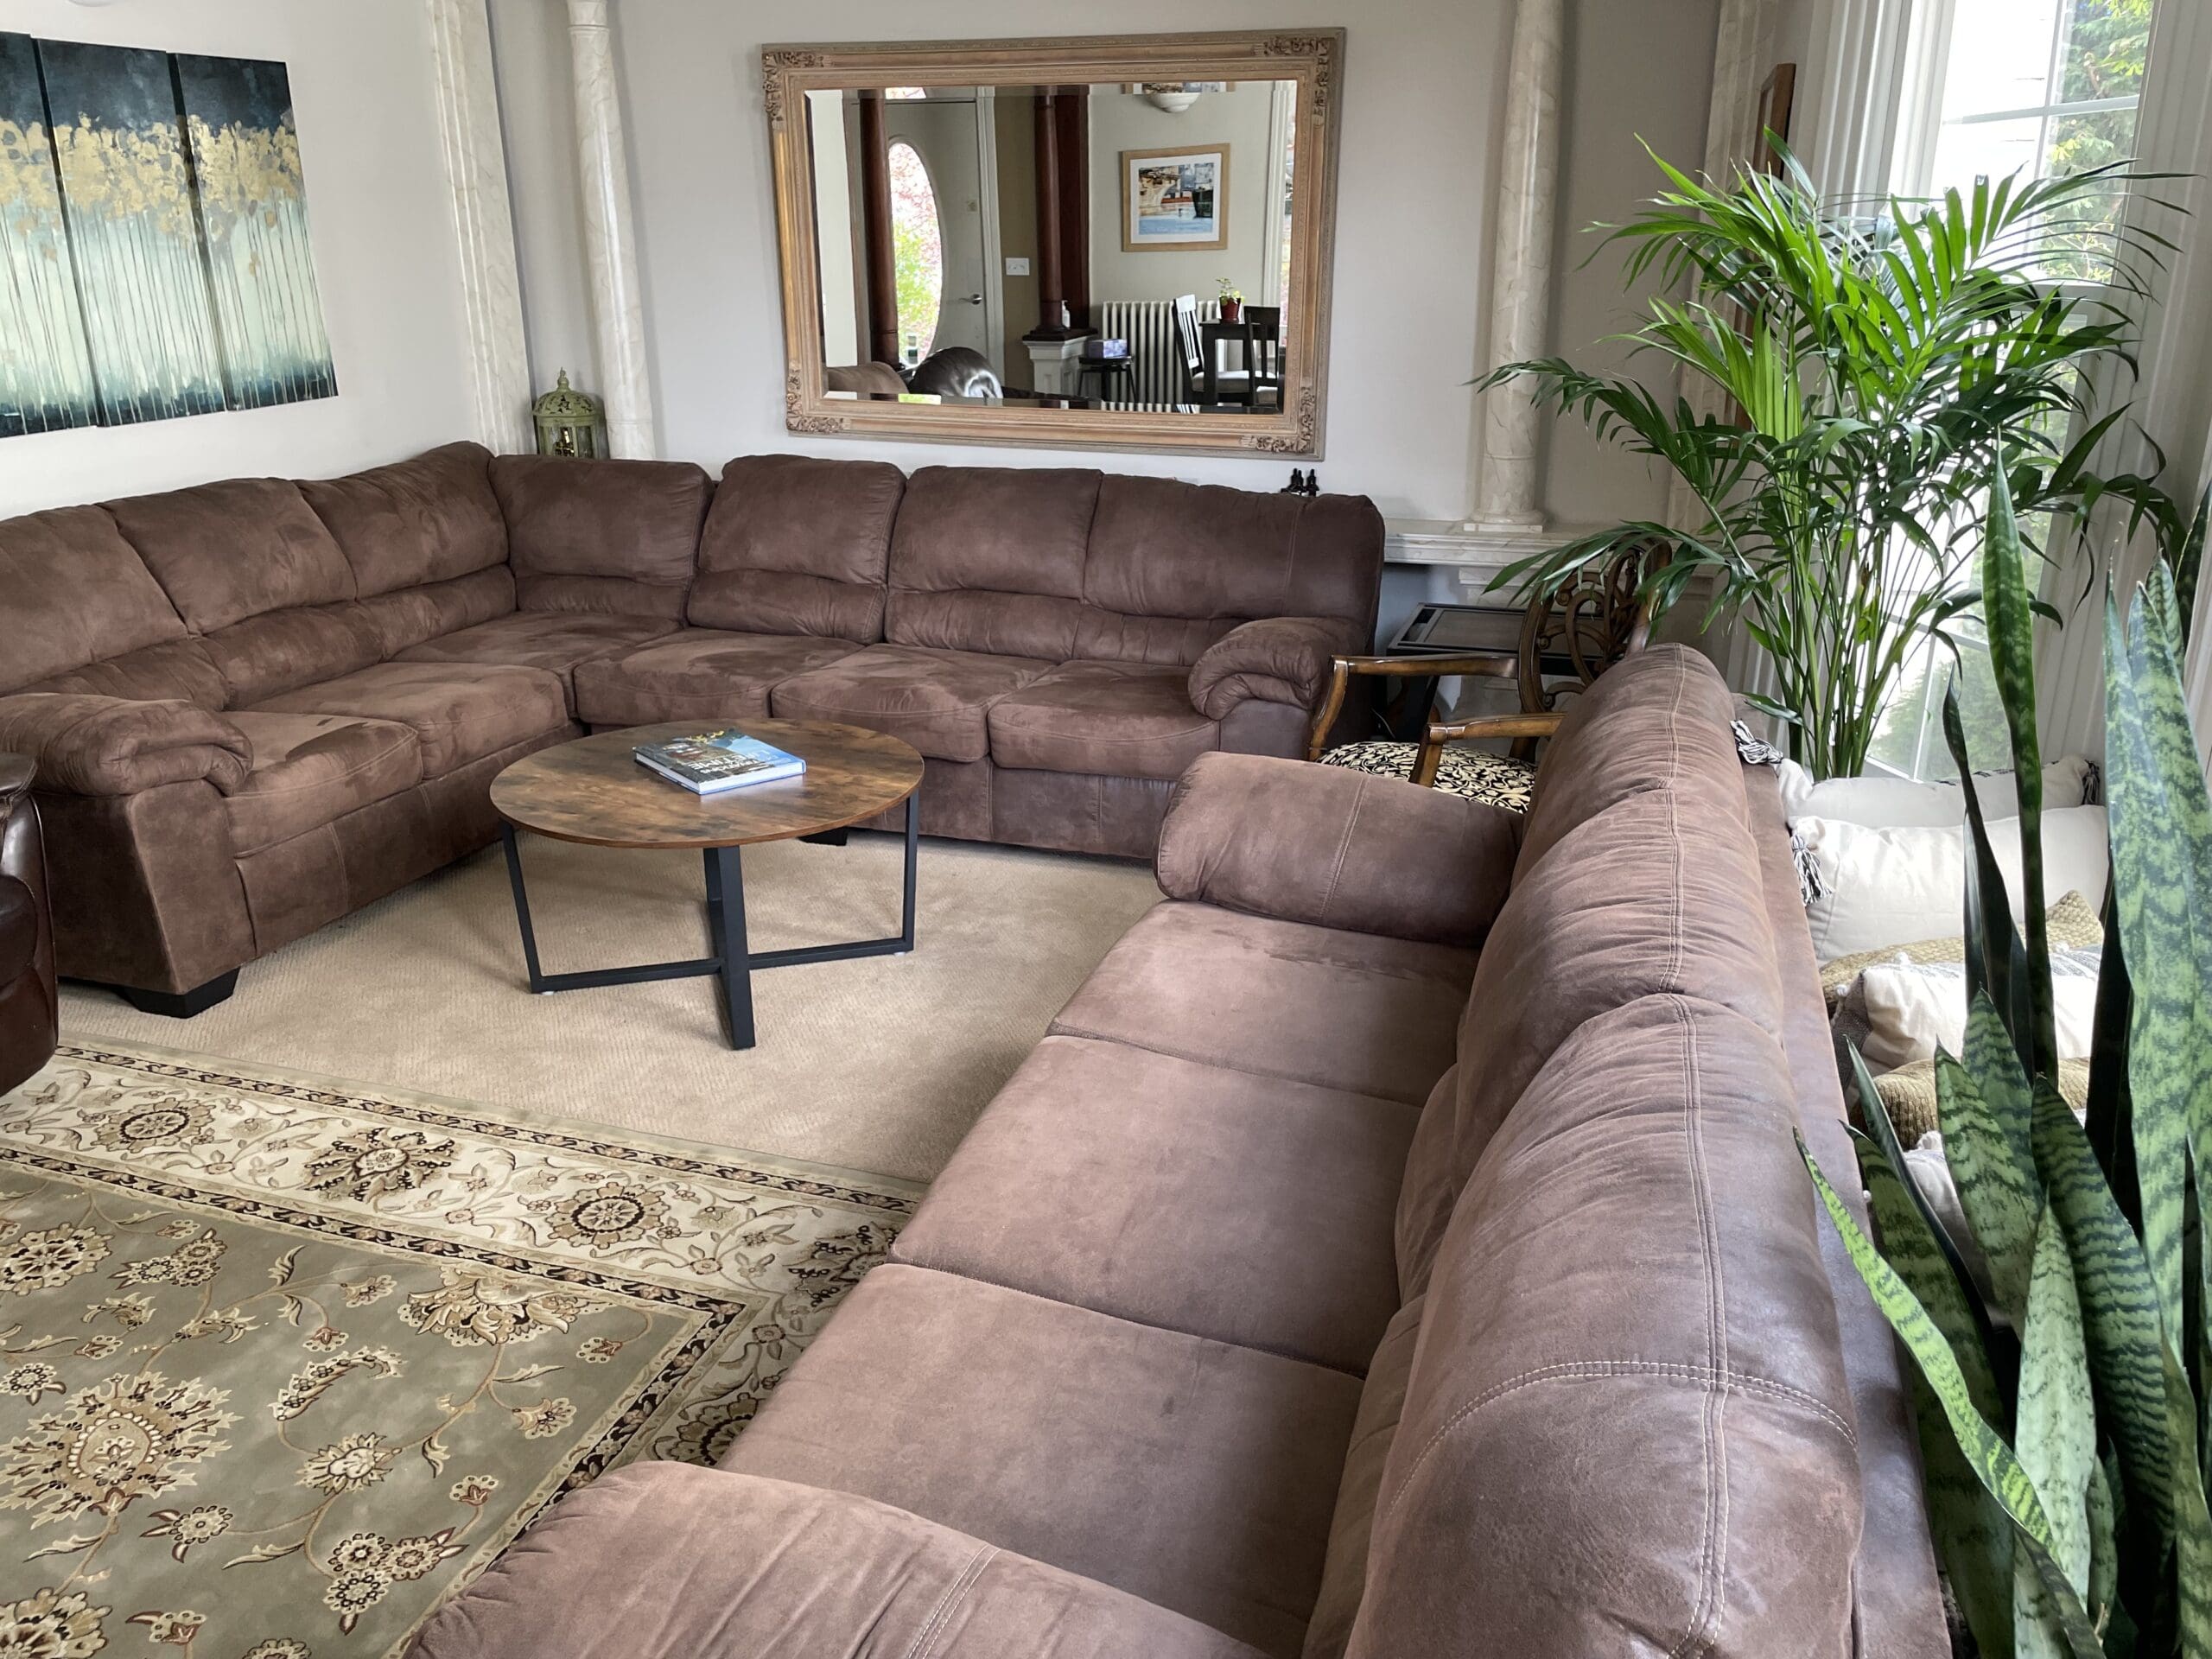 Seattle sober living home for men for addiction recovery - living area 3